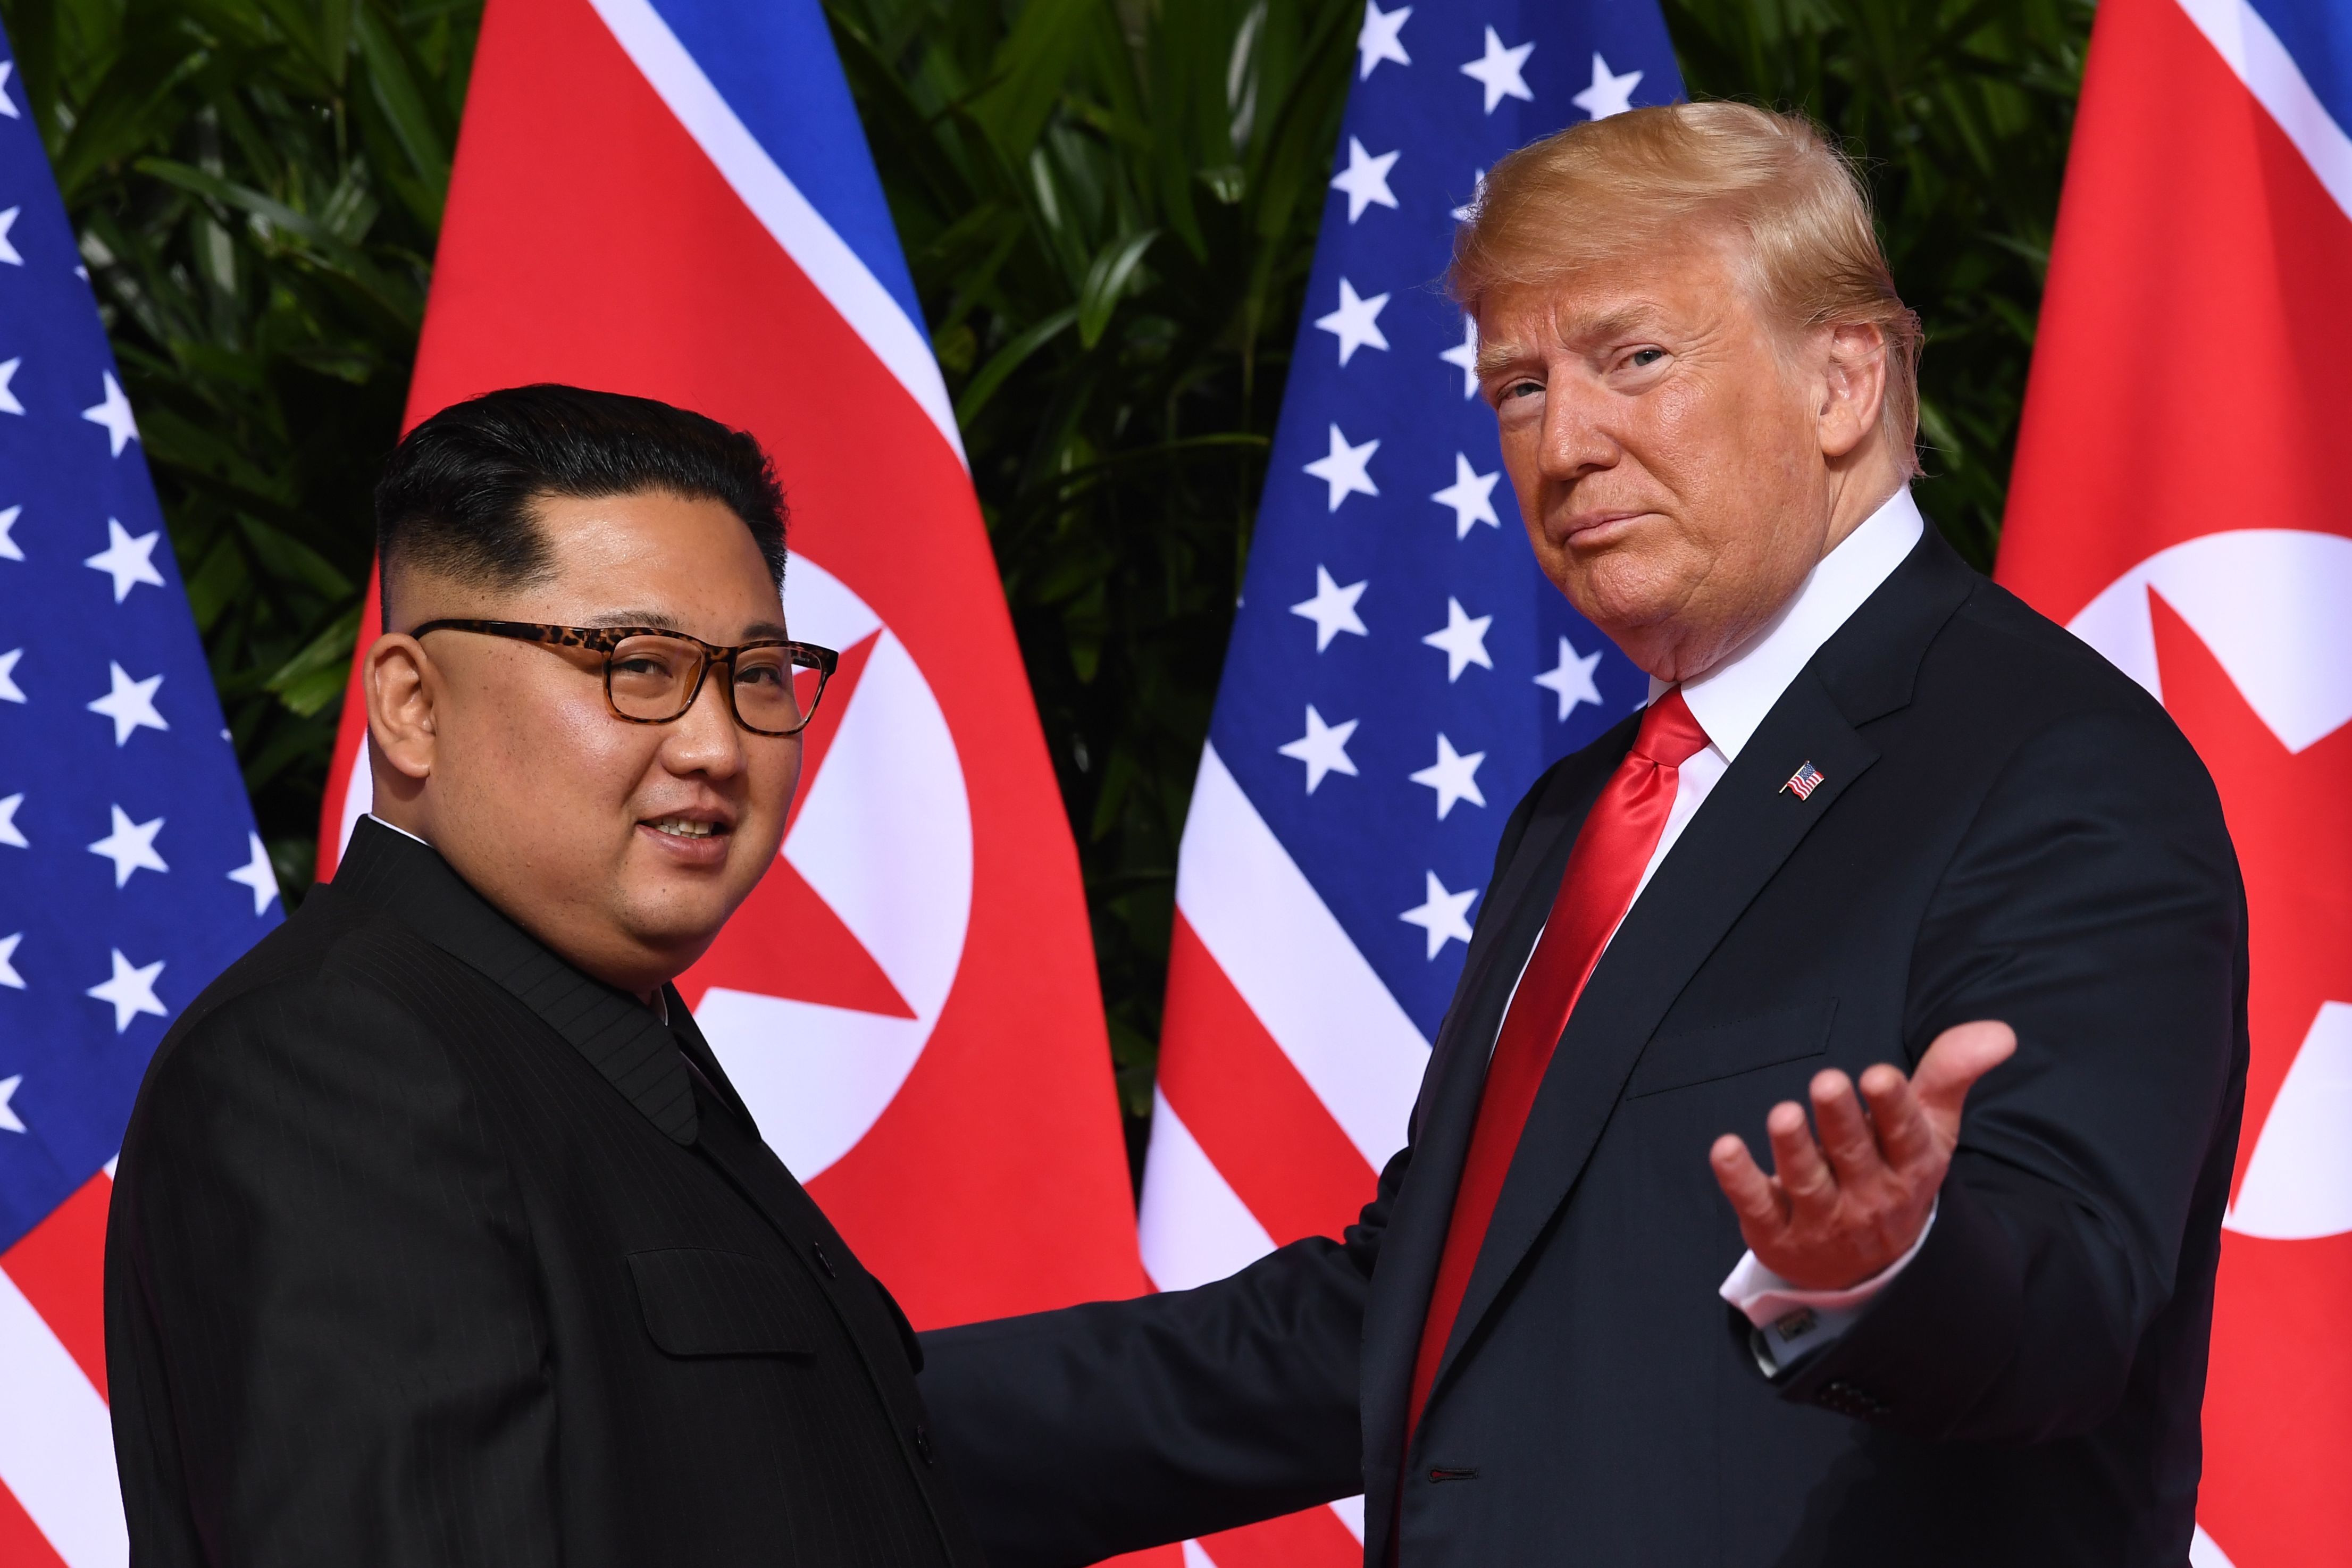 TOPSHOT - US President Donald Trump (R) gestures as he meets with North Korea's leader Kim Jong Un (L) at the start of their historic US-North Korea summit, at the Capella Hotel on Sentosa island in Singapore on June 12, 2018. - Donald Trump and Kim Jong Un have become on June 12 the first sitting US and North Korean leaders to meet, shake hands and negotiate to end a decades-old nuclear stand-off. (Photo by SAUL LOEB / AFP) (Photo credit should read SAUL LOEB/AFP via Getty Images)